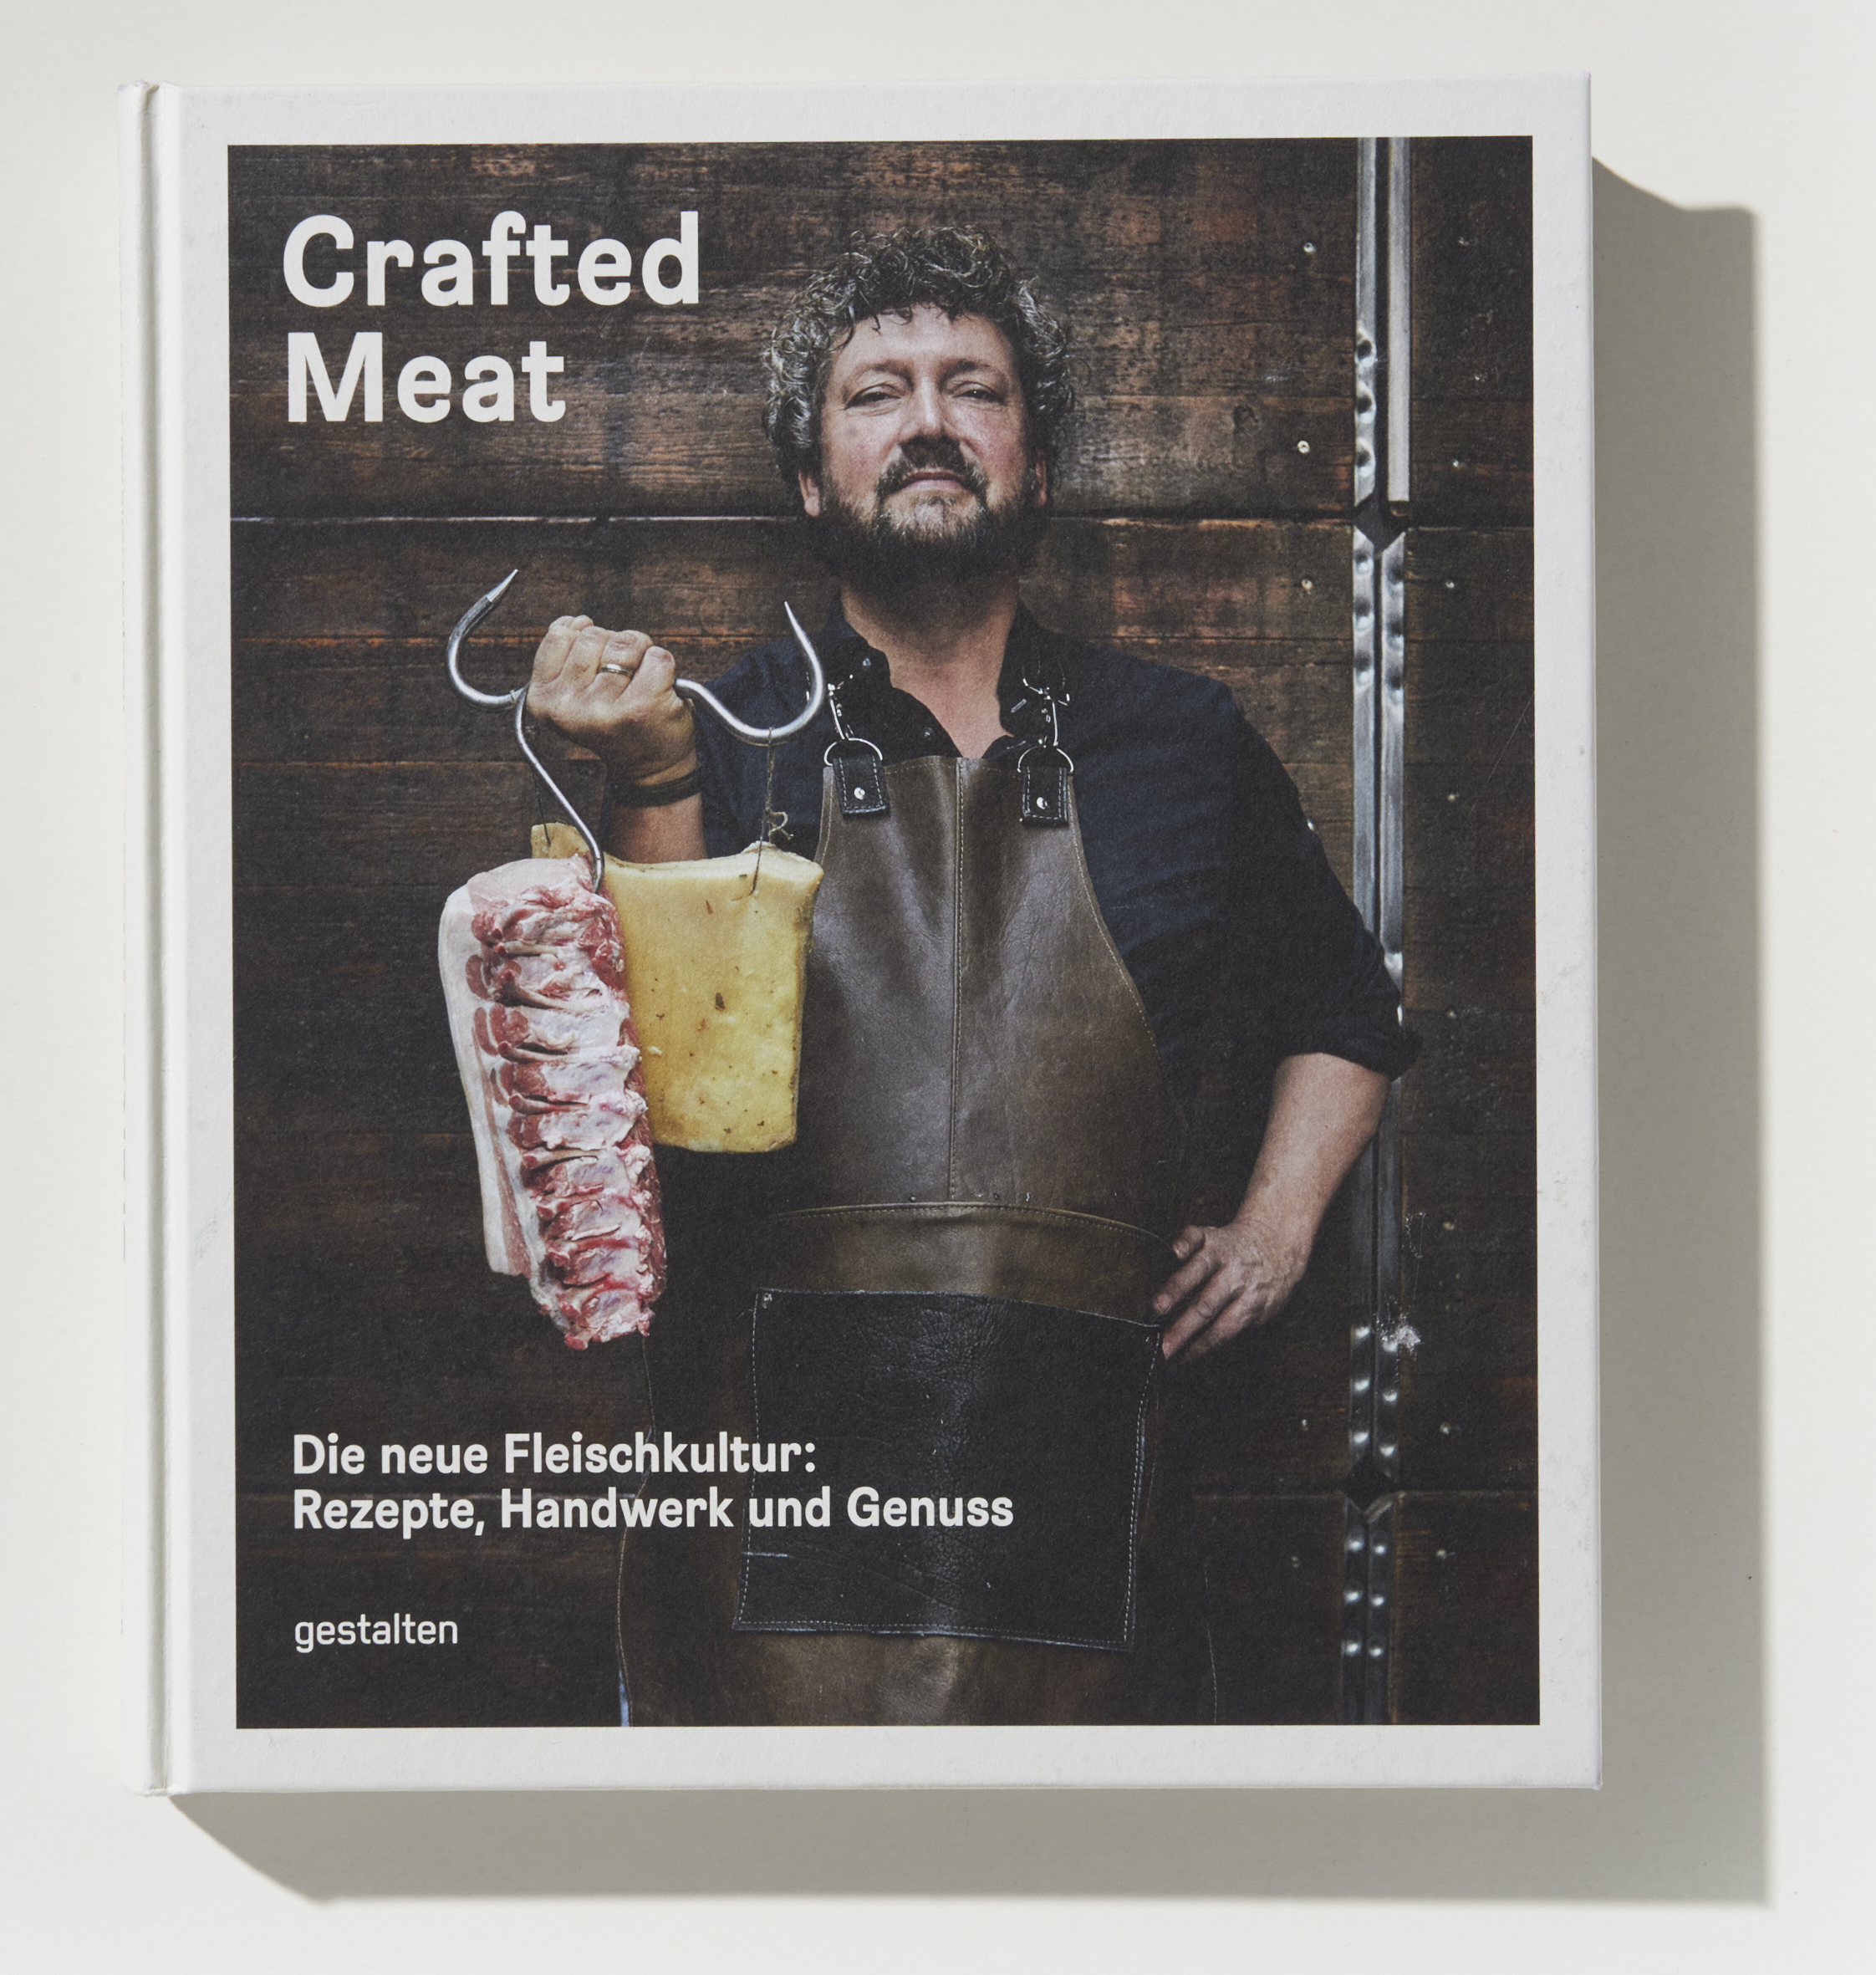 Crafted Meat Cover.jpg